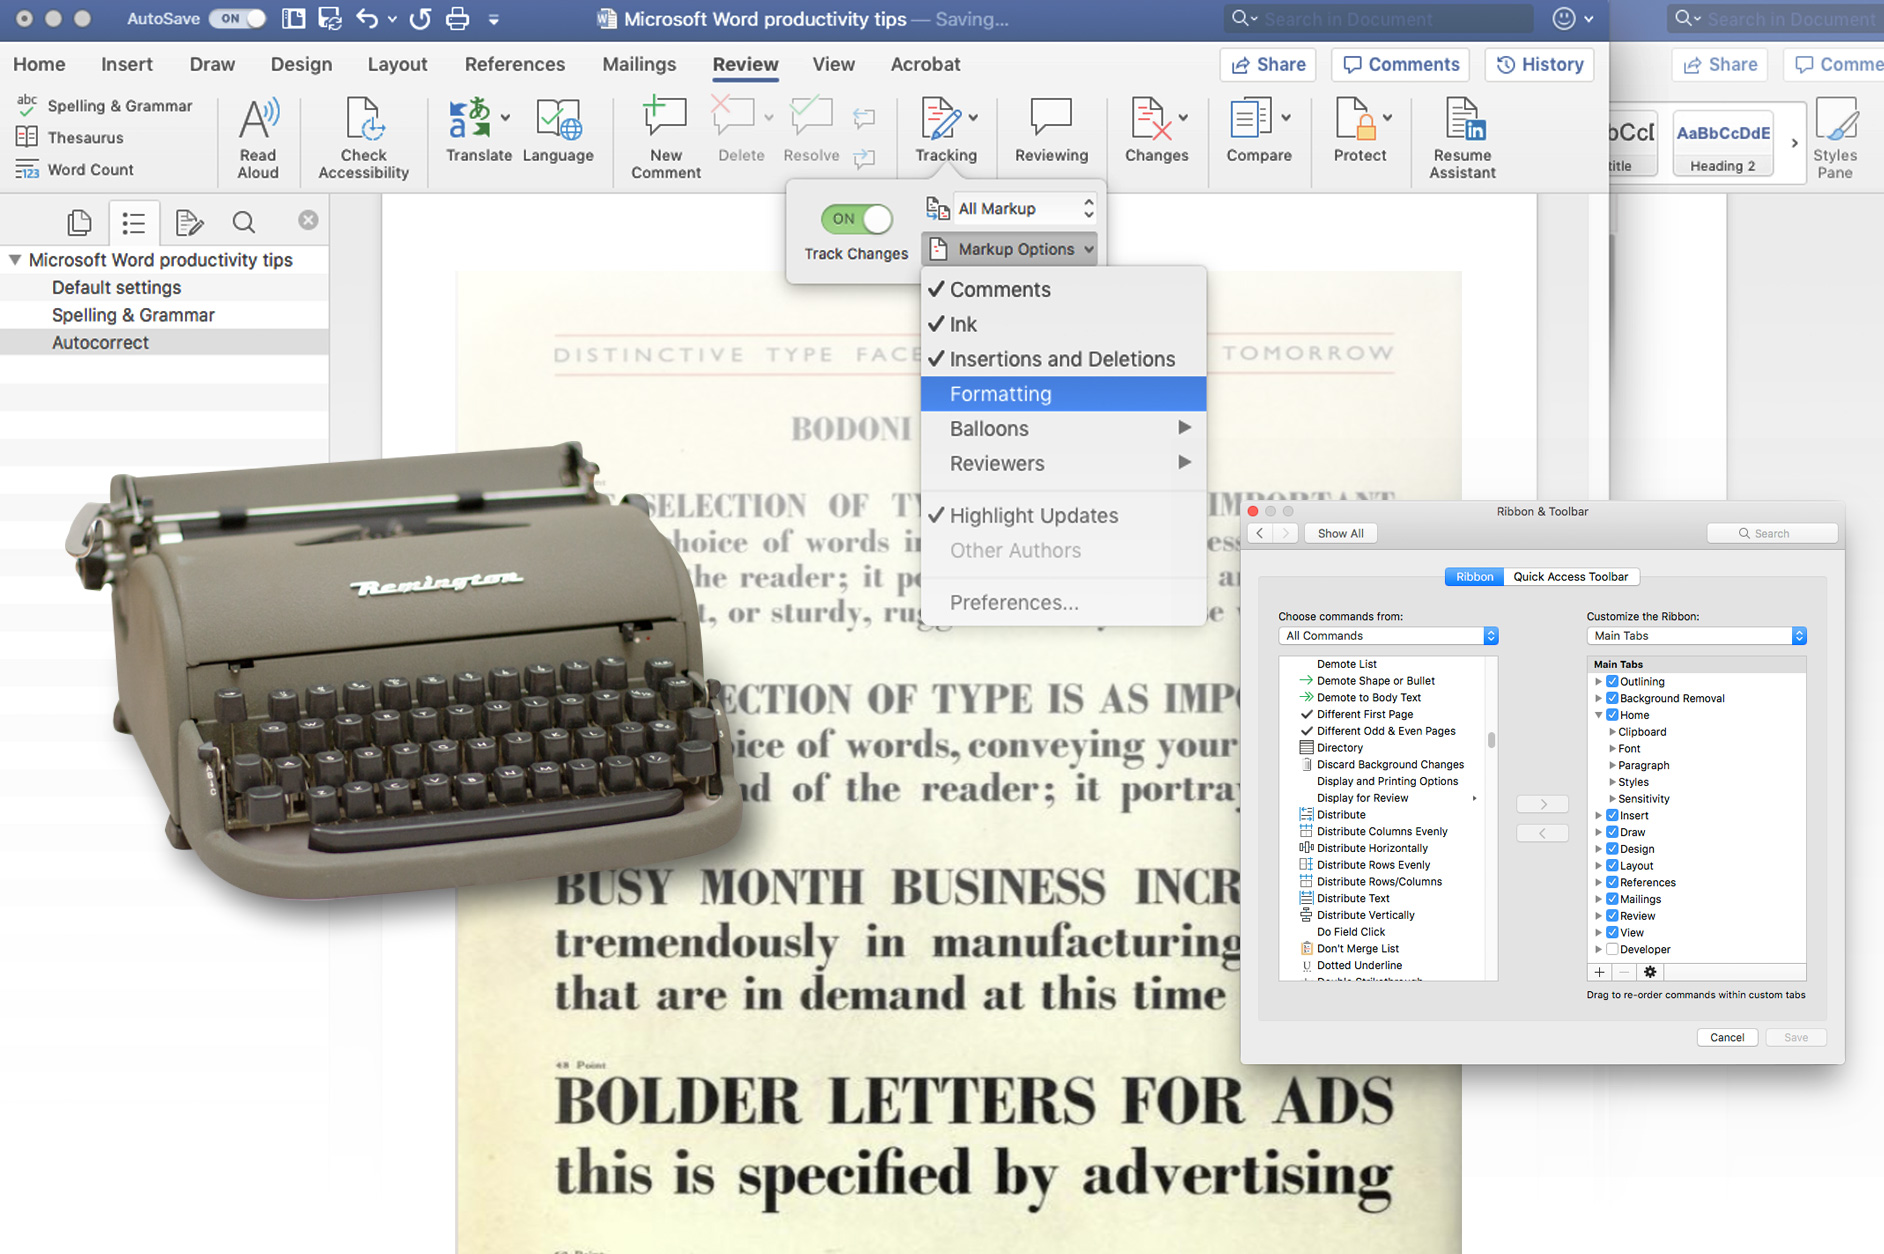 Microsoft Word Productivity Tip #3 – Let's Look it UP with Smart